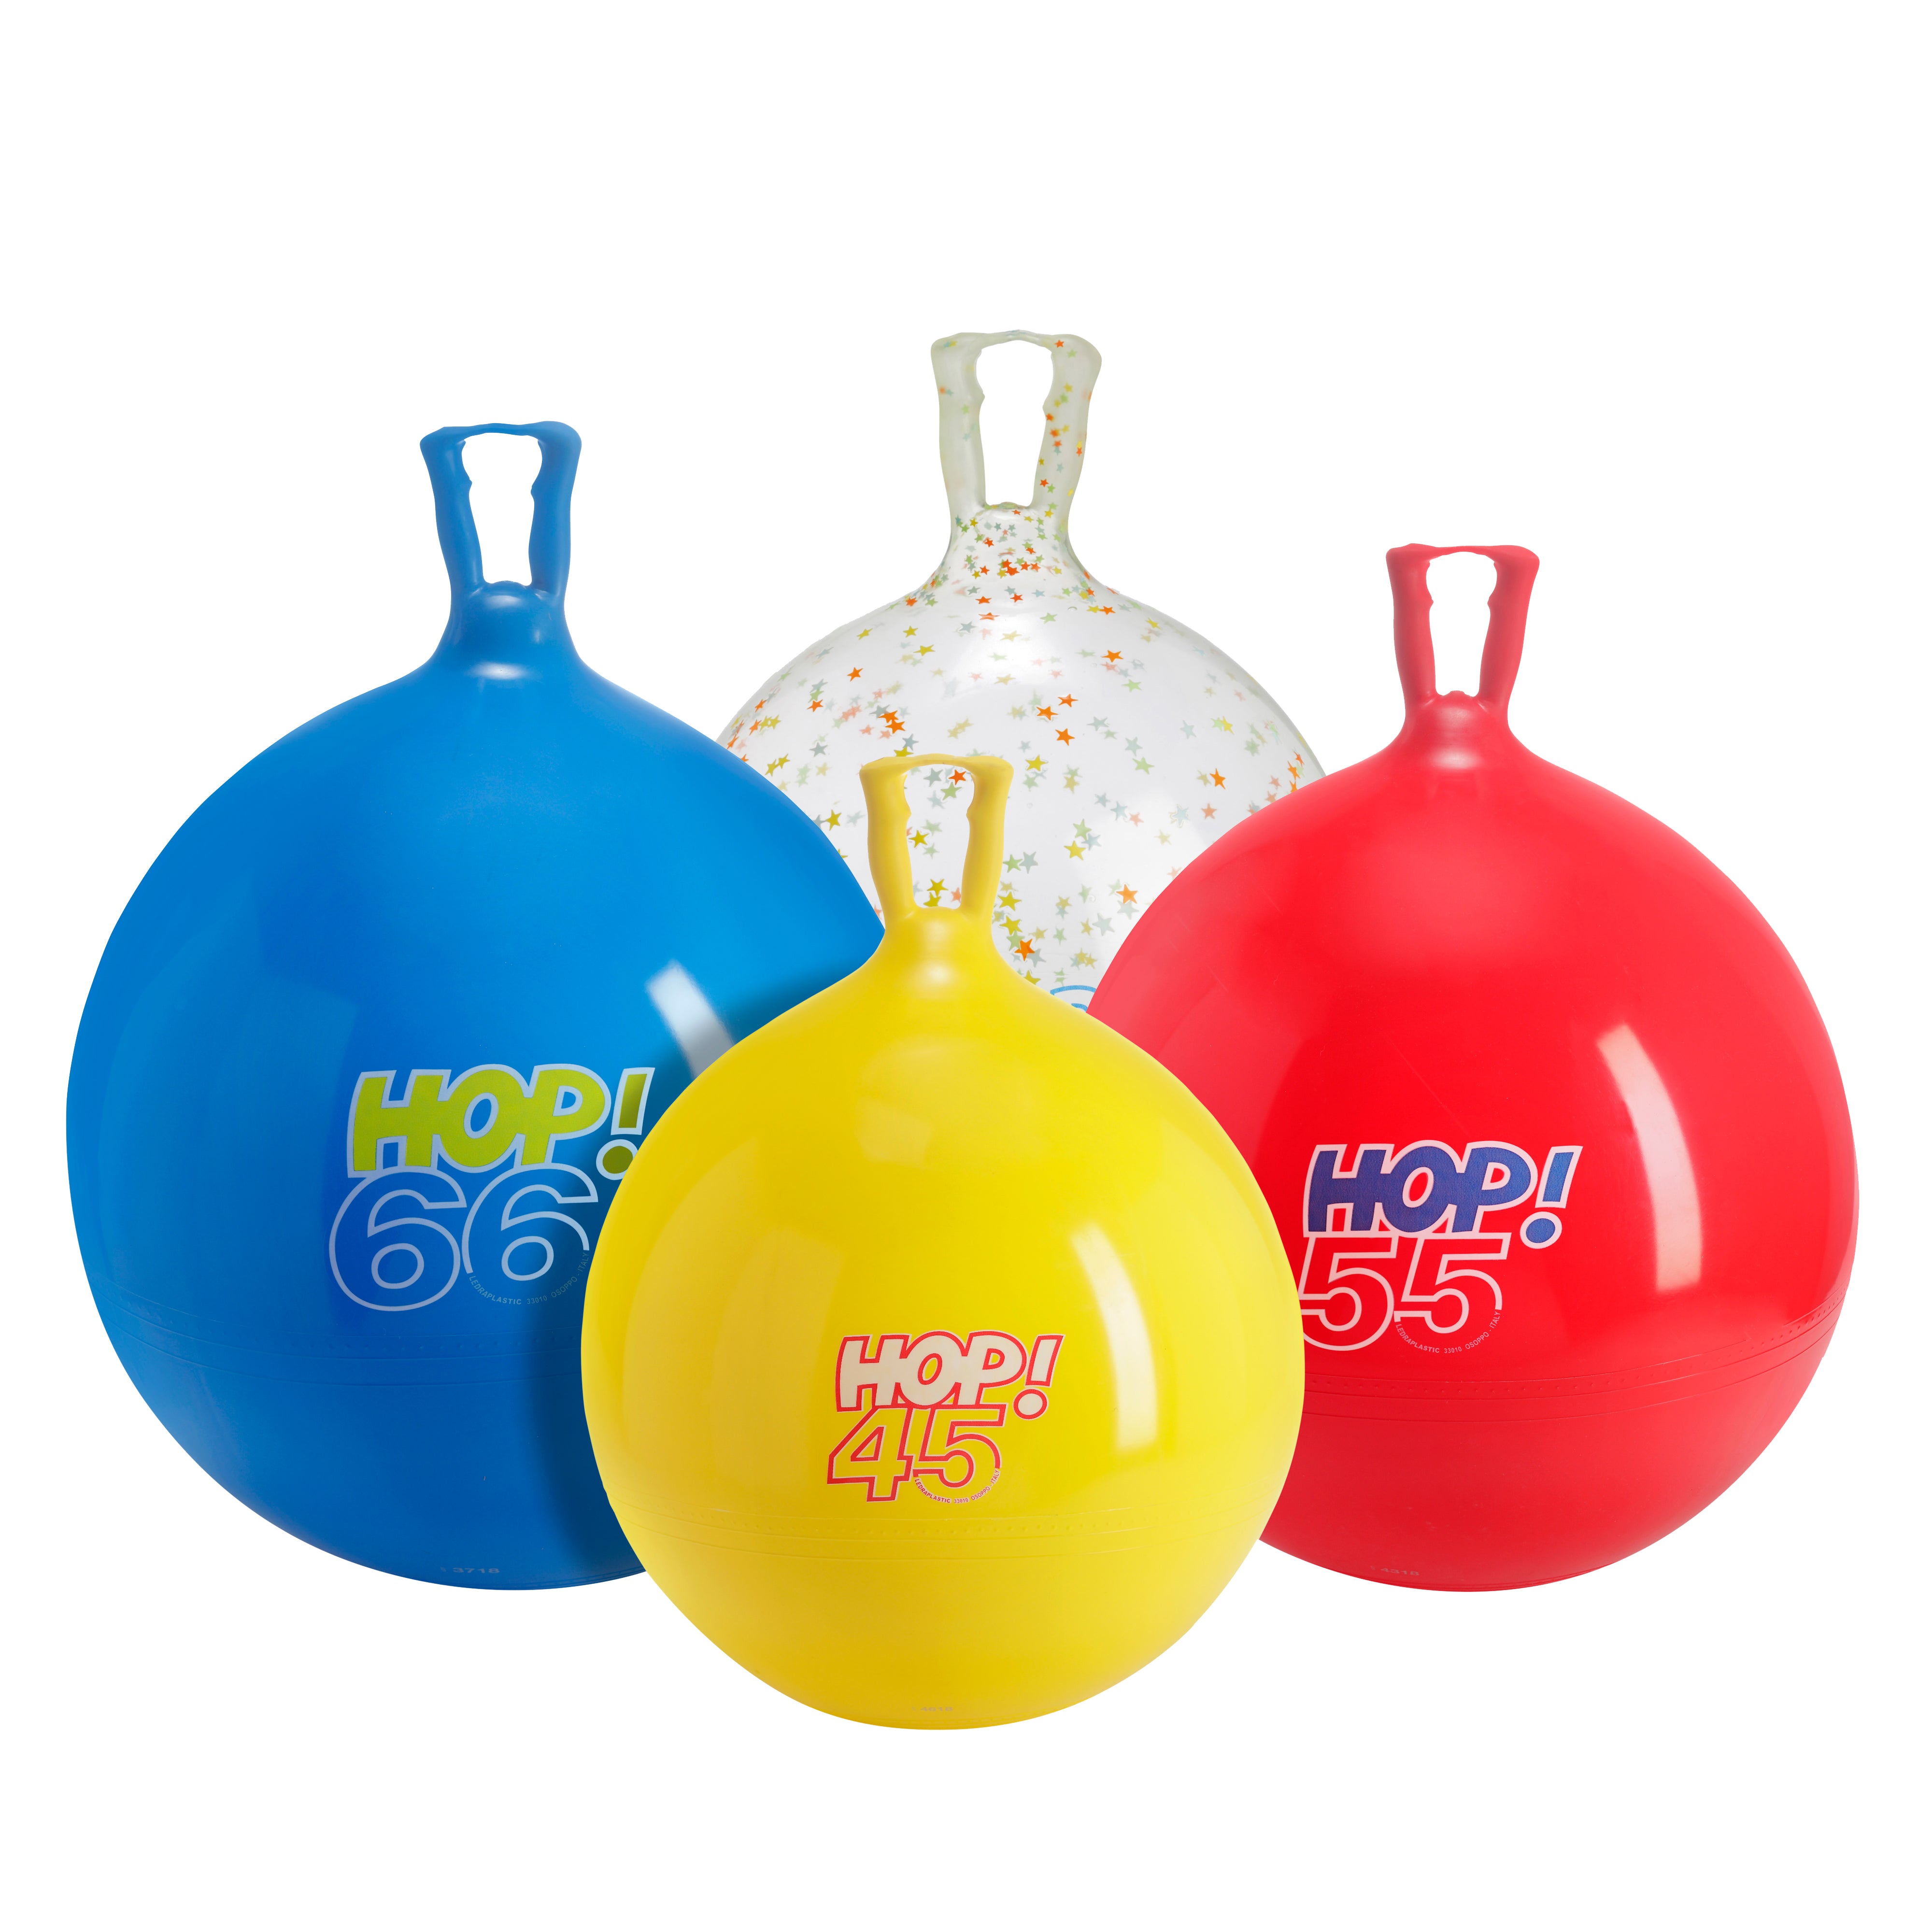 The Hop Ball is a dynamic toy, which promotes balance and coordination in children while providing a fun workout. The soft one-piece handgrip ensures the safest bouncing as it is made of the same material as the ball. Thanks to this special handle, the Gymnic high quality hopper can be included in motor activity programs for innovative and more involving exercises